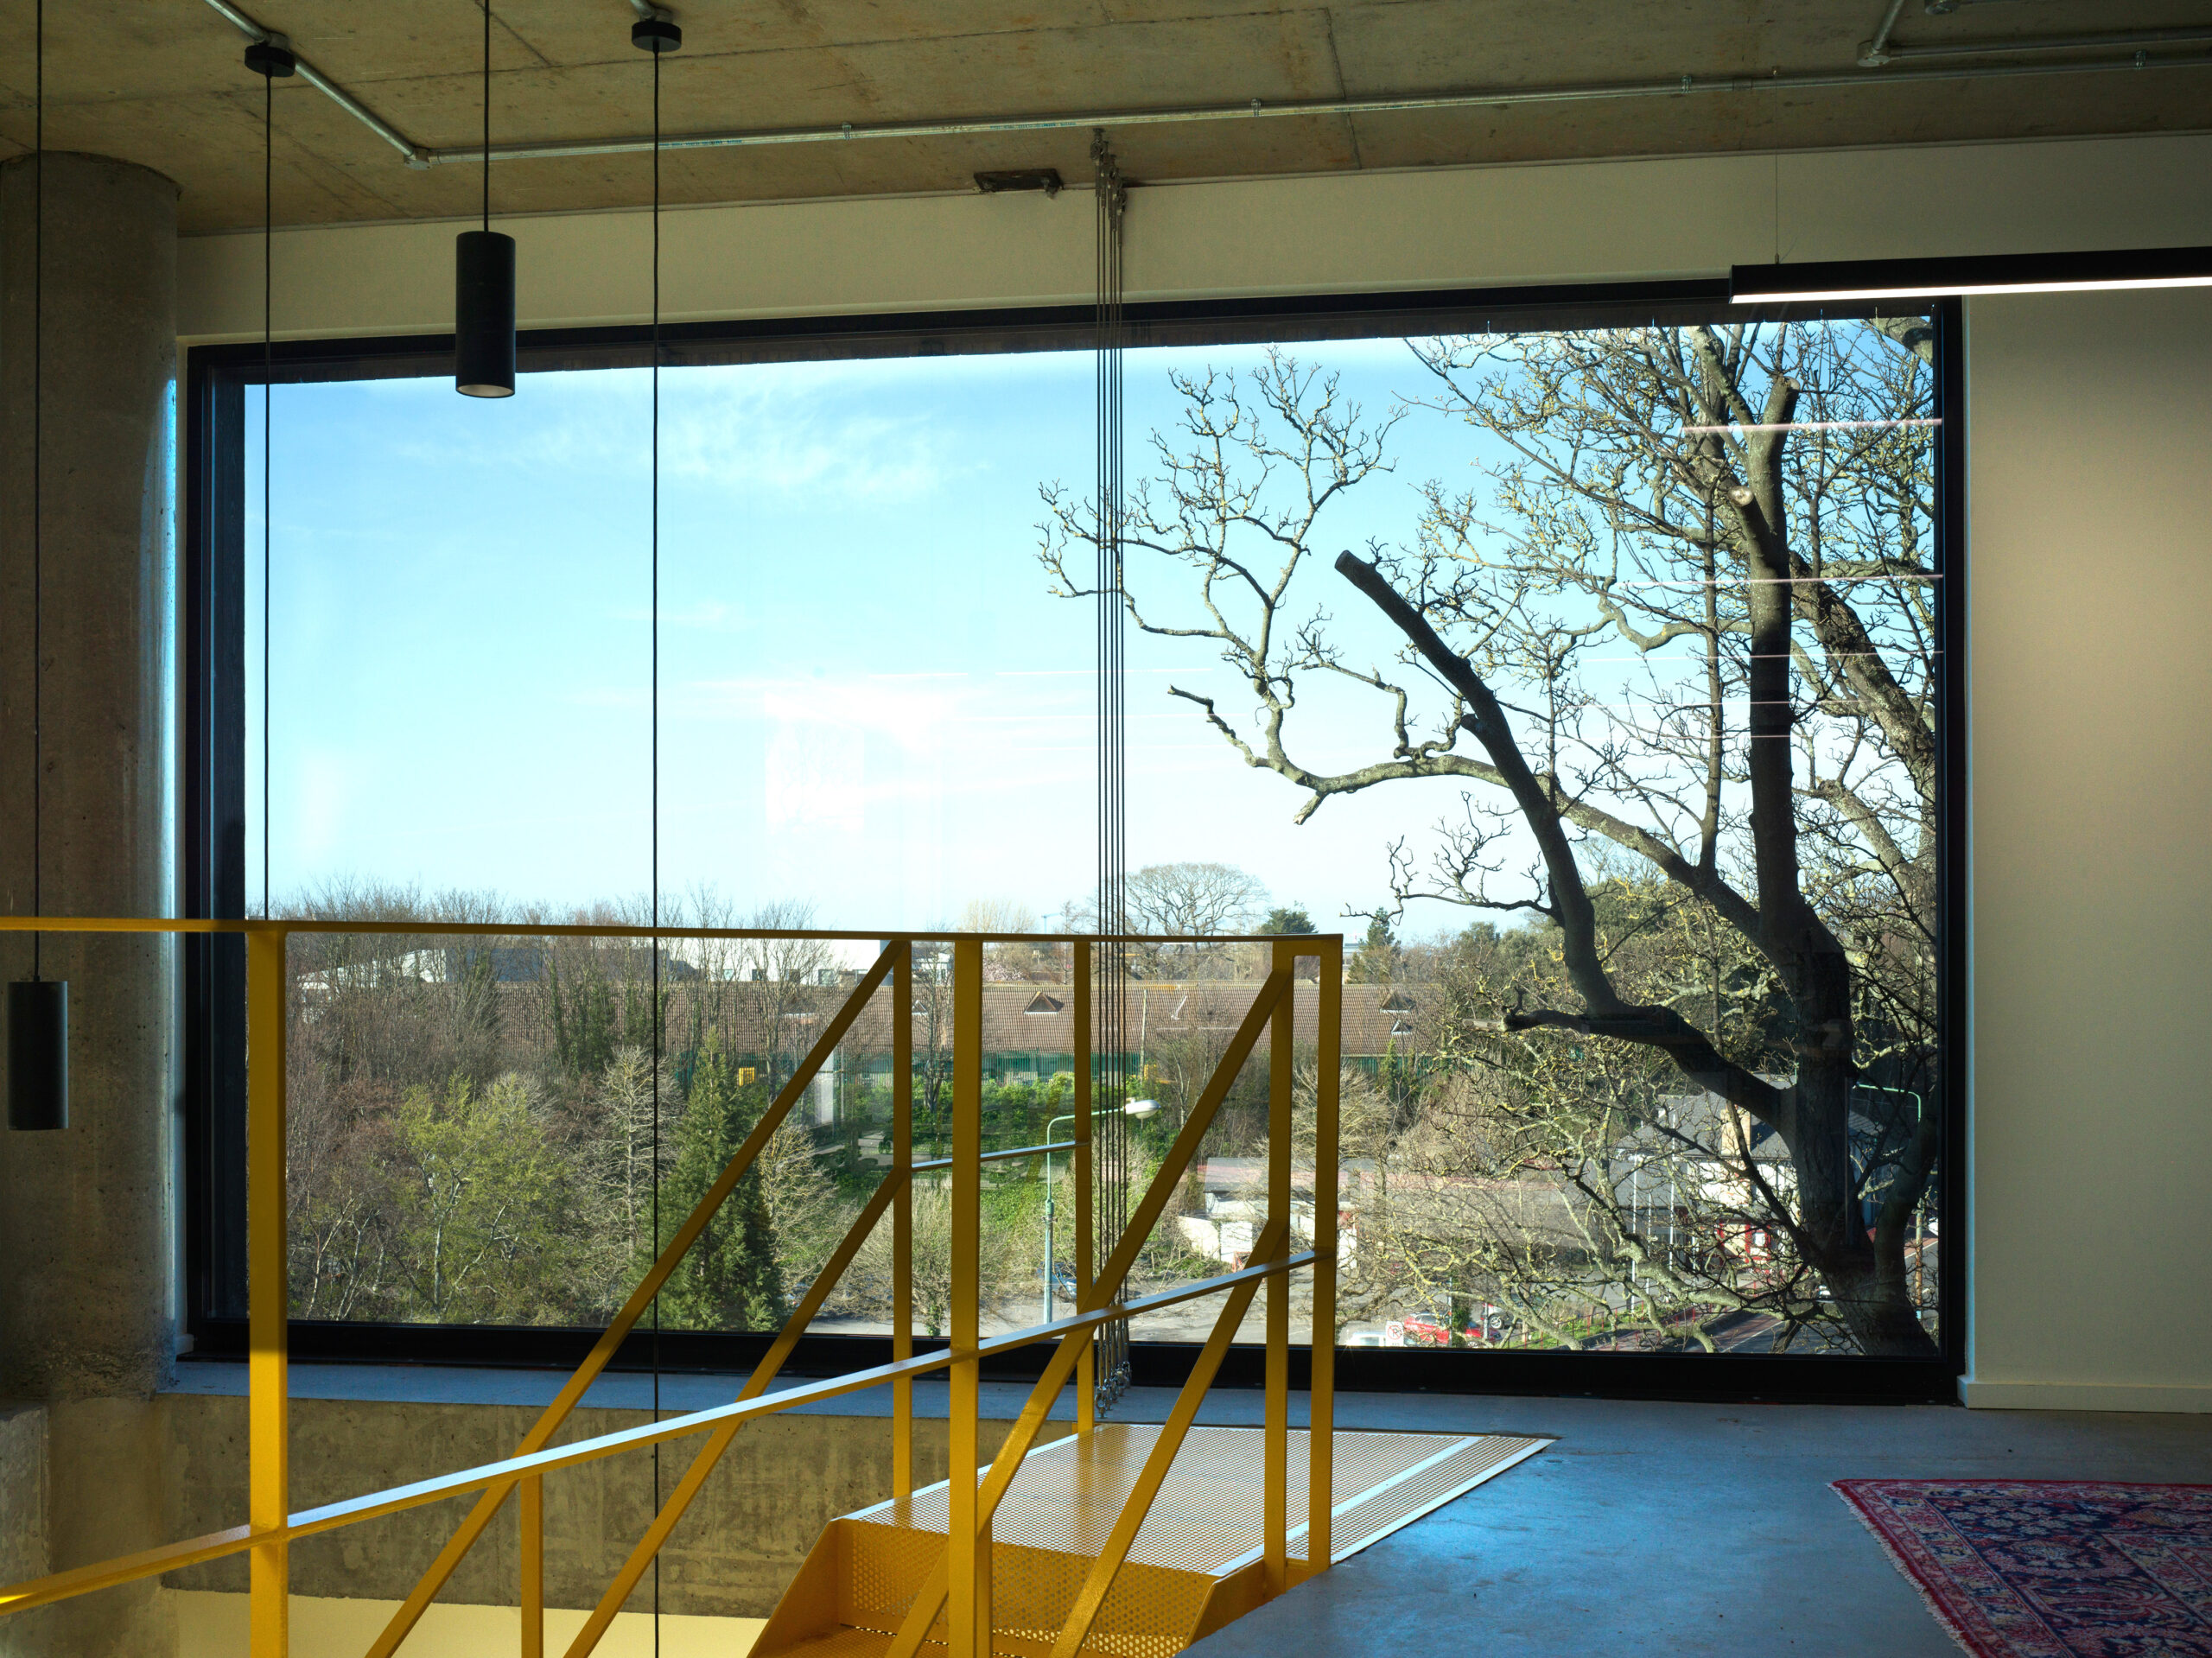 A close-up of a large plate-glass window, in landscape orientation. In front of it are visible the top of a bright yellow metal staircase, a plain concrete floor, and a fragment of a red oriental rug. Outside the window is a bare winter tree, and further away other trees and residential rooftops can be seen. In front of the window hang industrial-style lights.